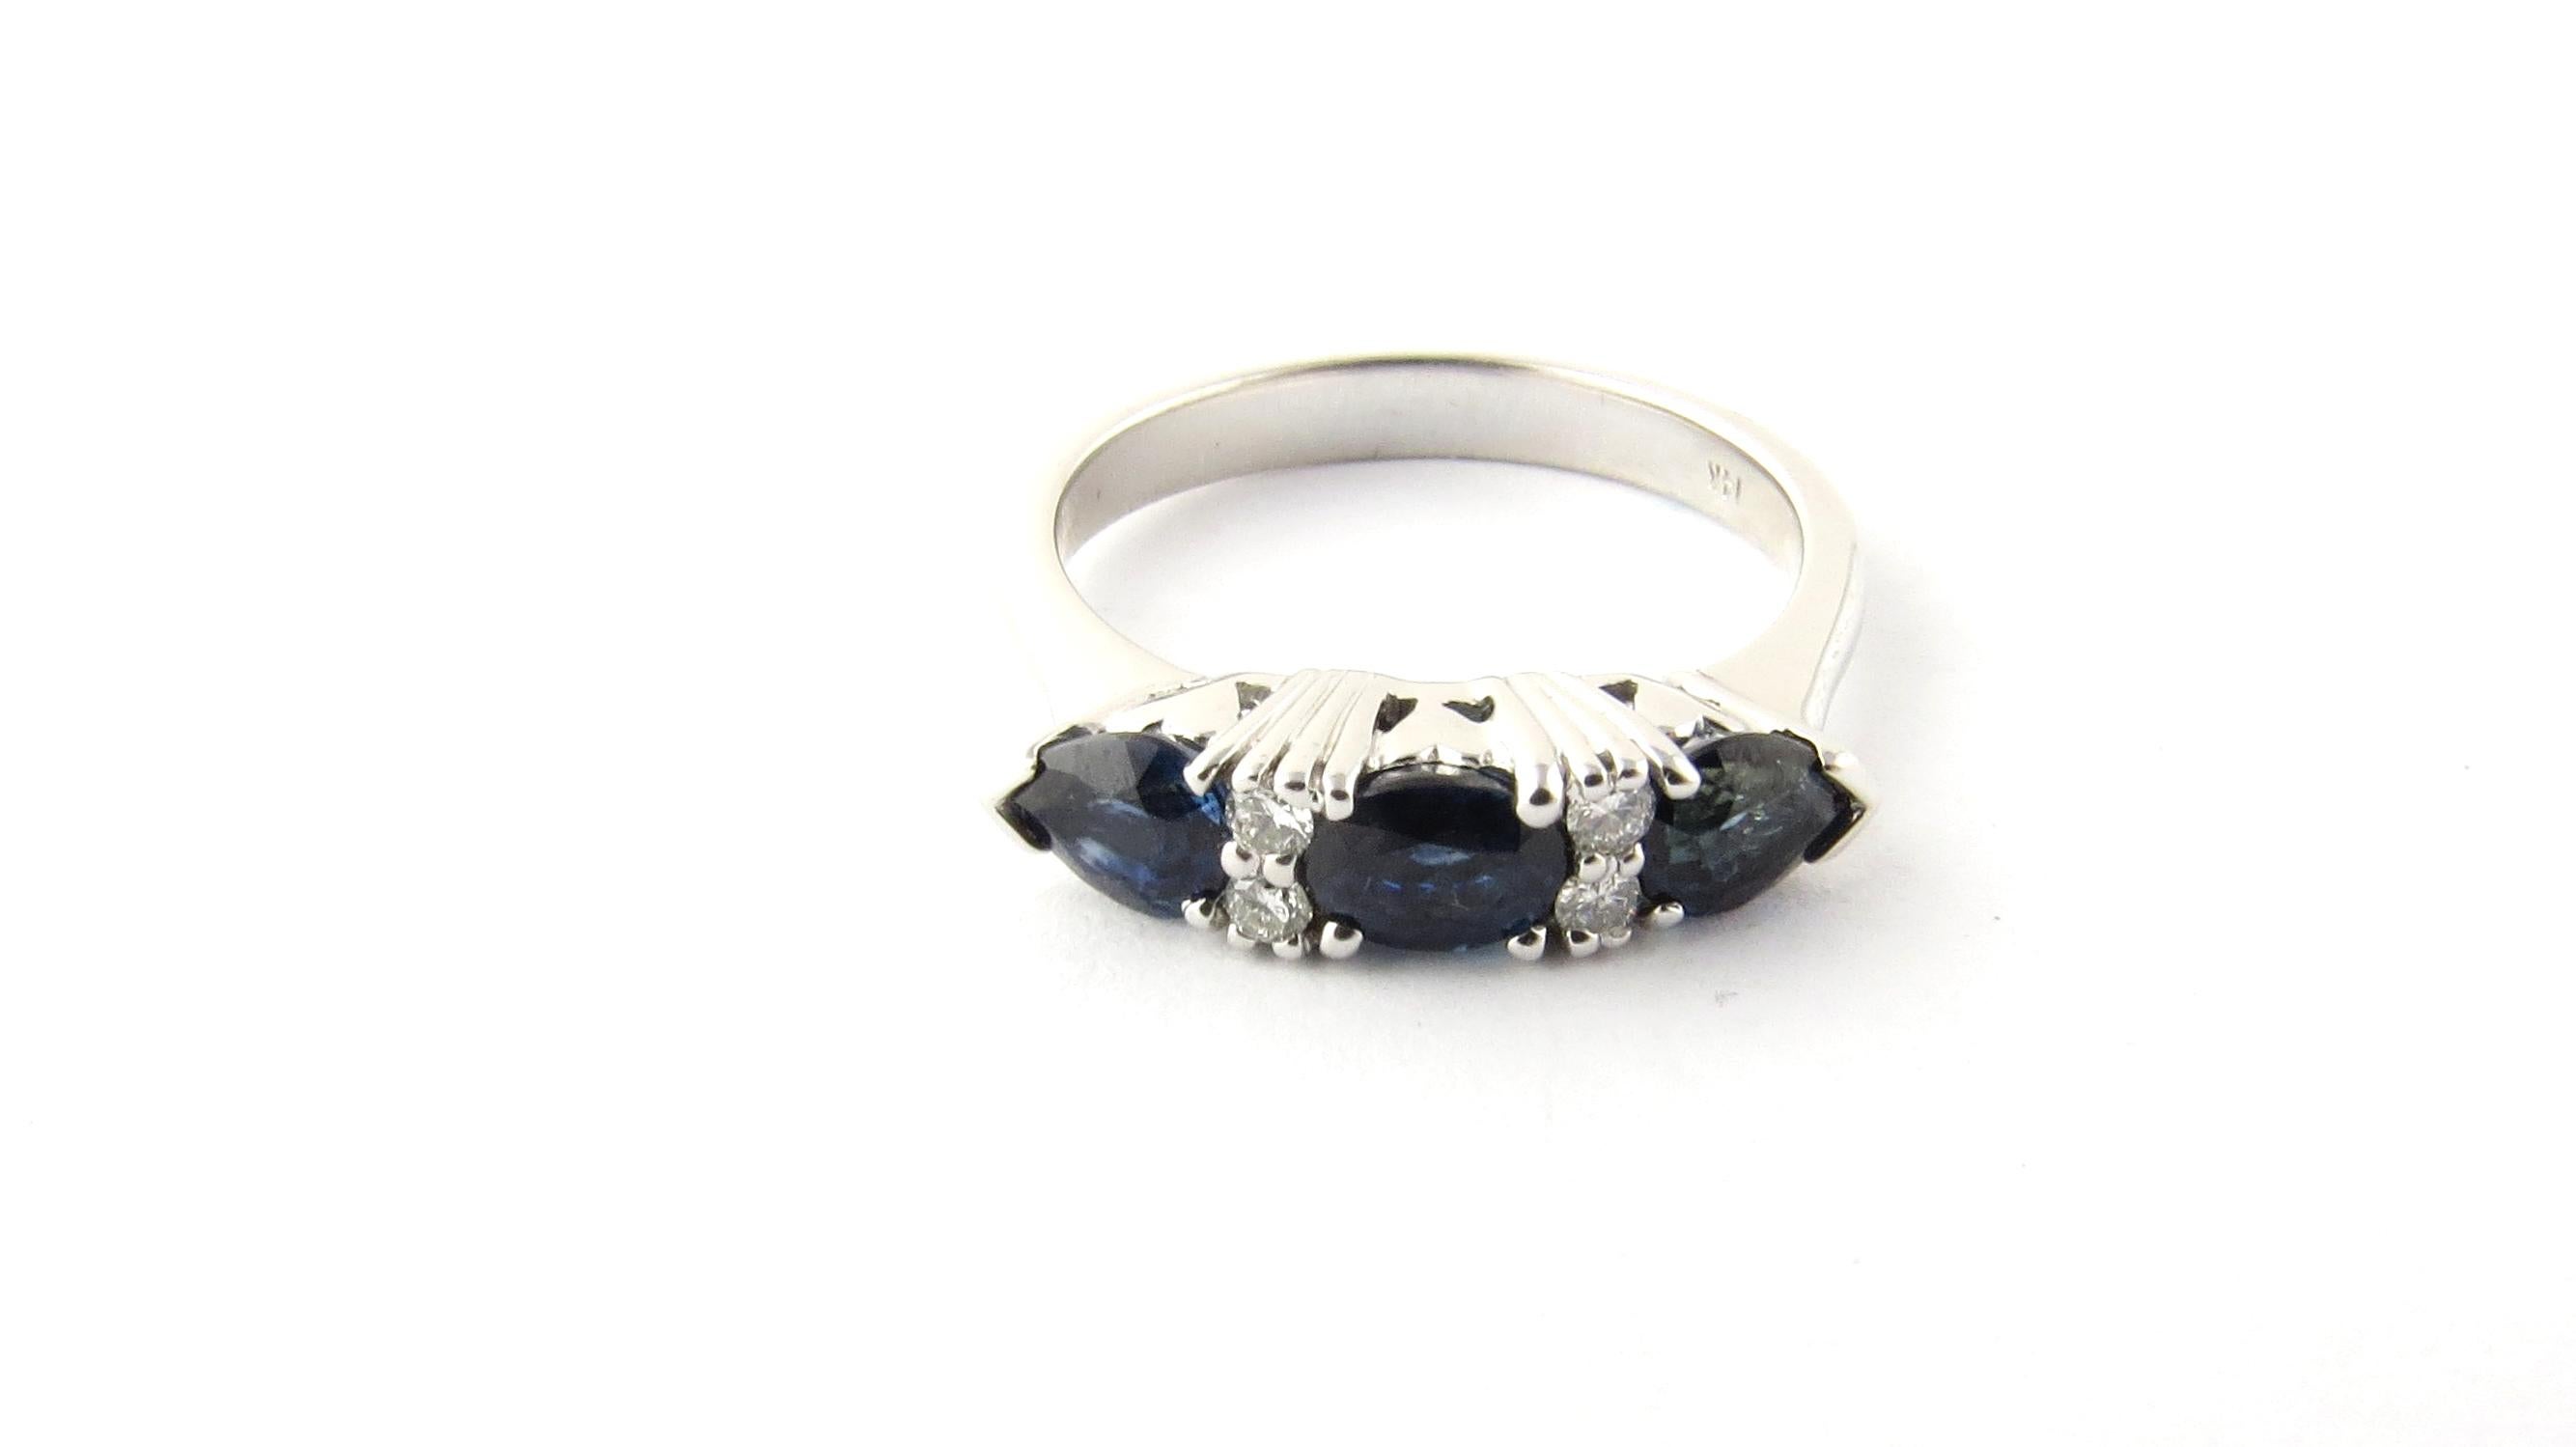 Vintage 14 Karat White Gold Sapphire and Diamond Ring Size 6.5.

This stunning ring features three genuine sapphires (one oval, two pear) accented with four round brilliant cut diamonds set in classic 14K white gold.

Approximate total diamond